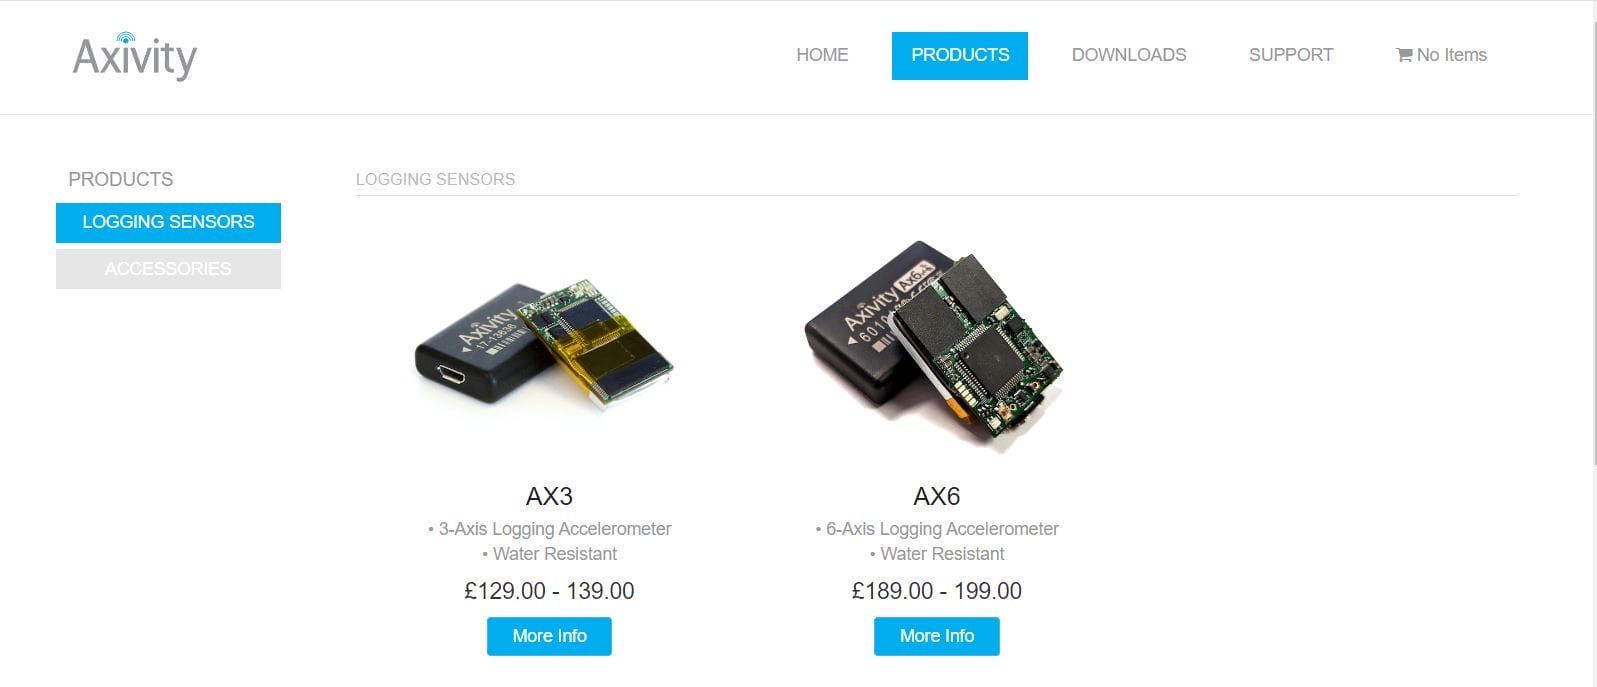 Webpage screenshot displaying axivity's products, specifically ax3 and ax6 logging accelerometers, including product images, descriptions, and prices.